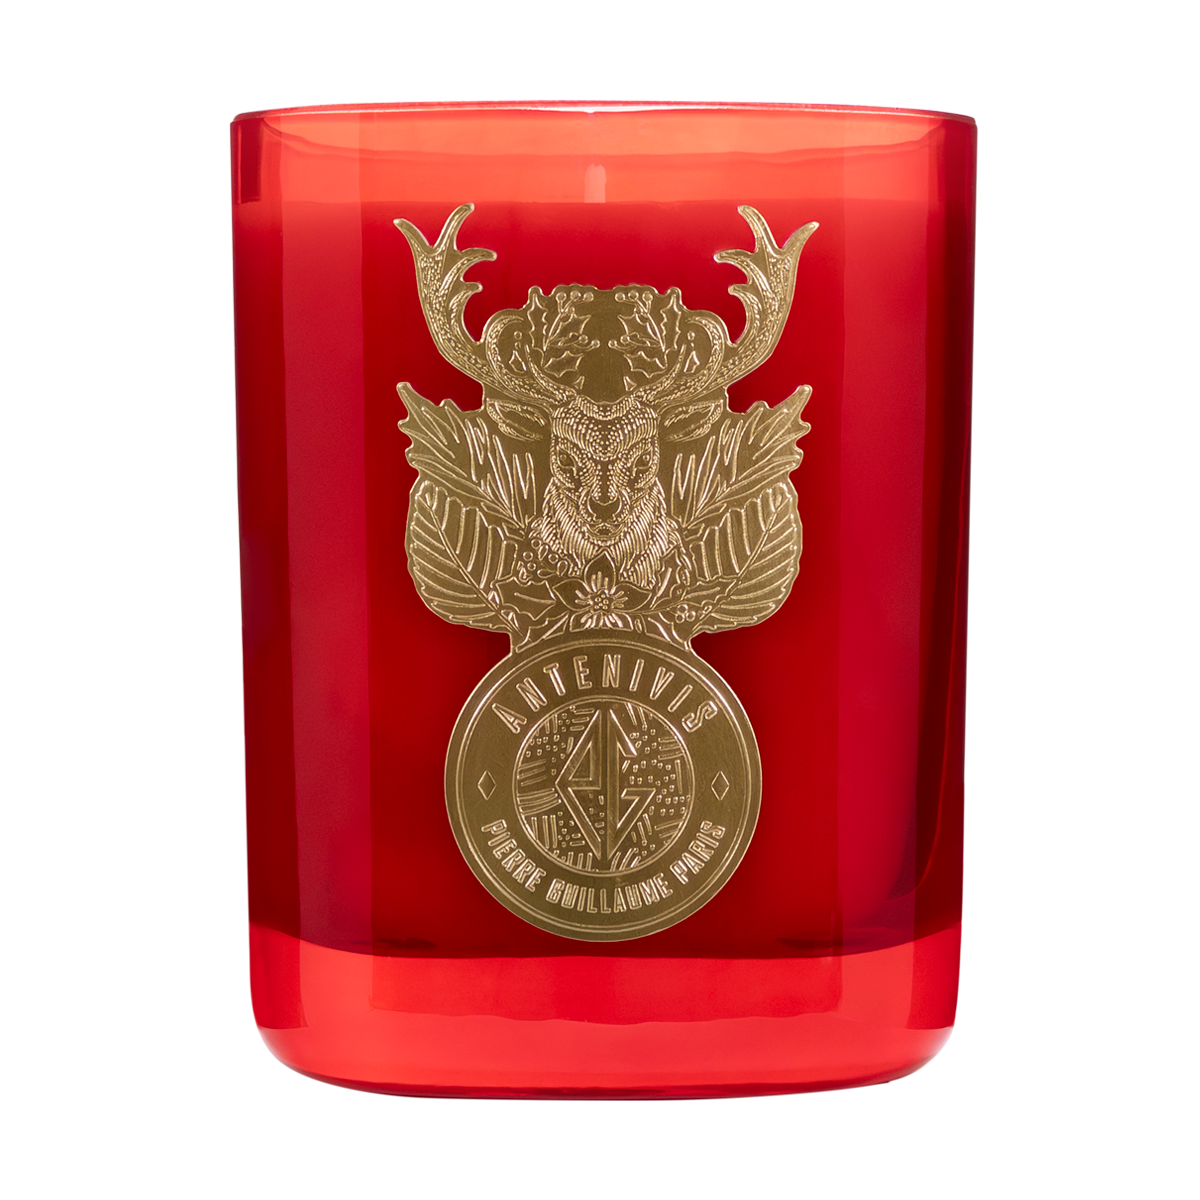 ANTENIVIS Scented Candle 240gr